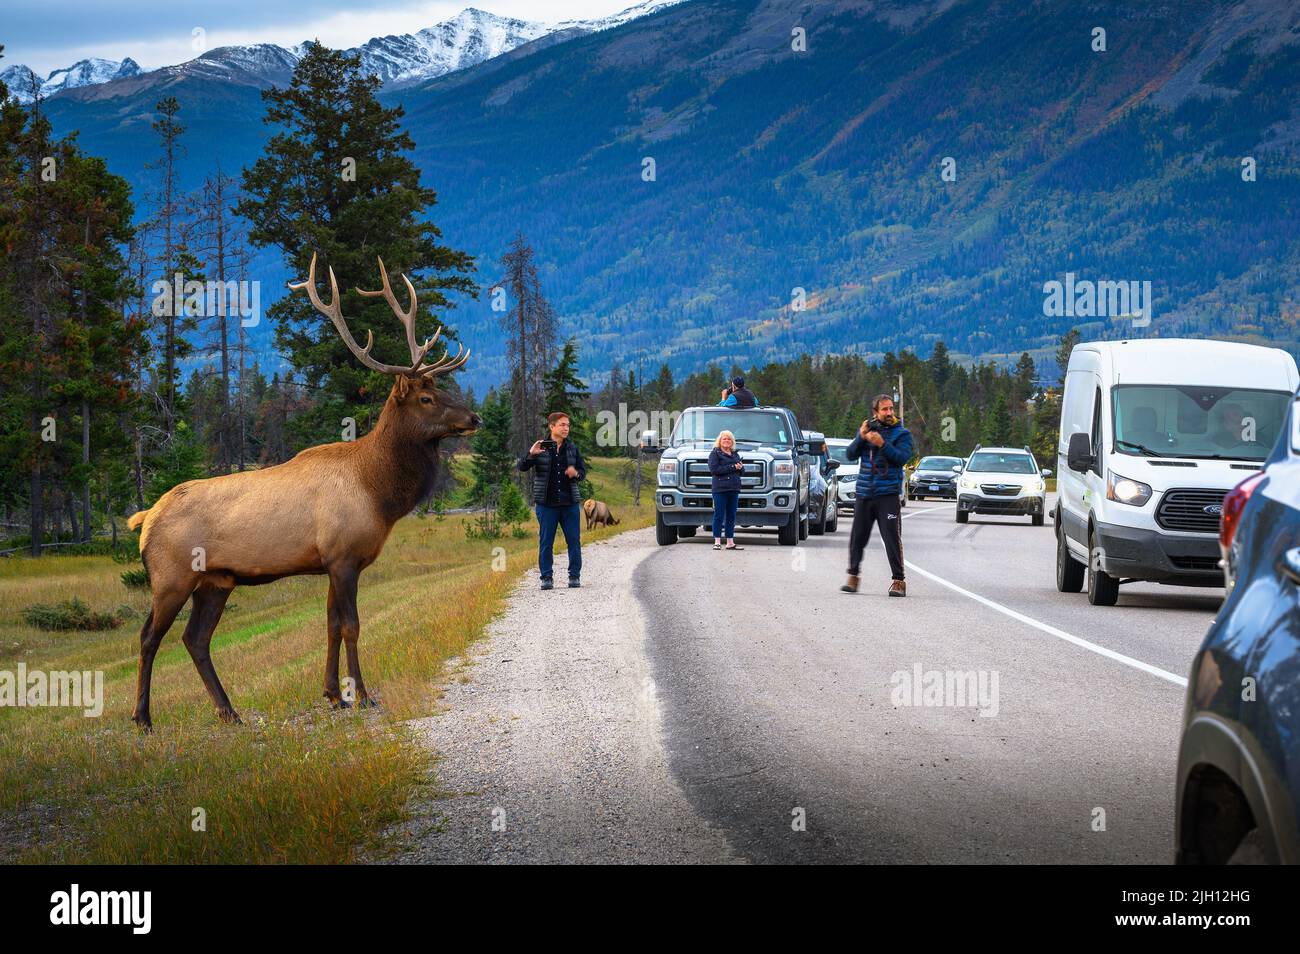 Tourists photograph a wild deer crossing a road in Canada Stock Photo